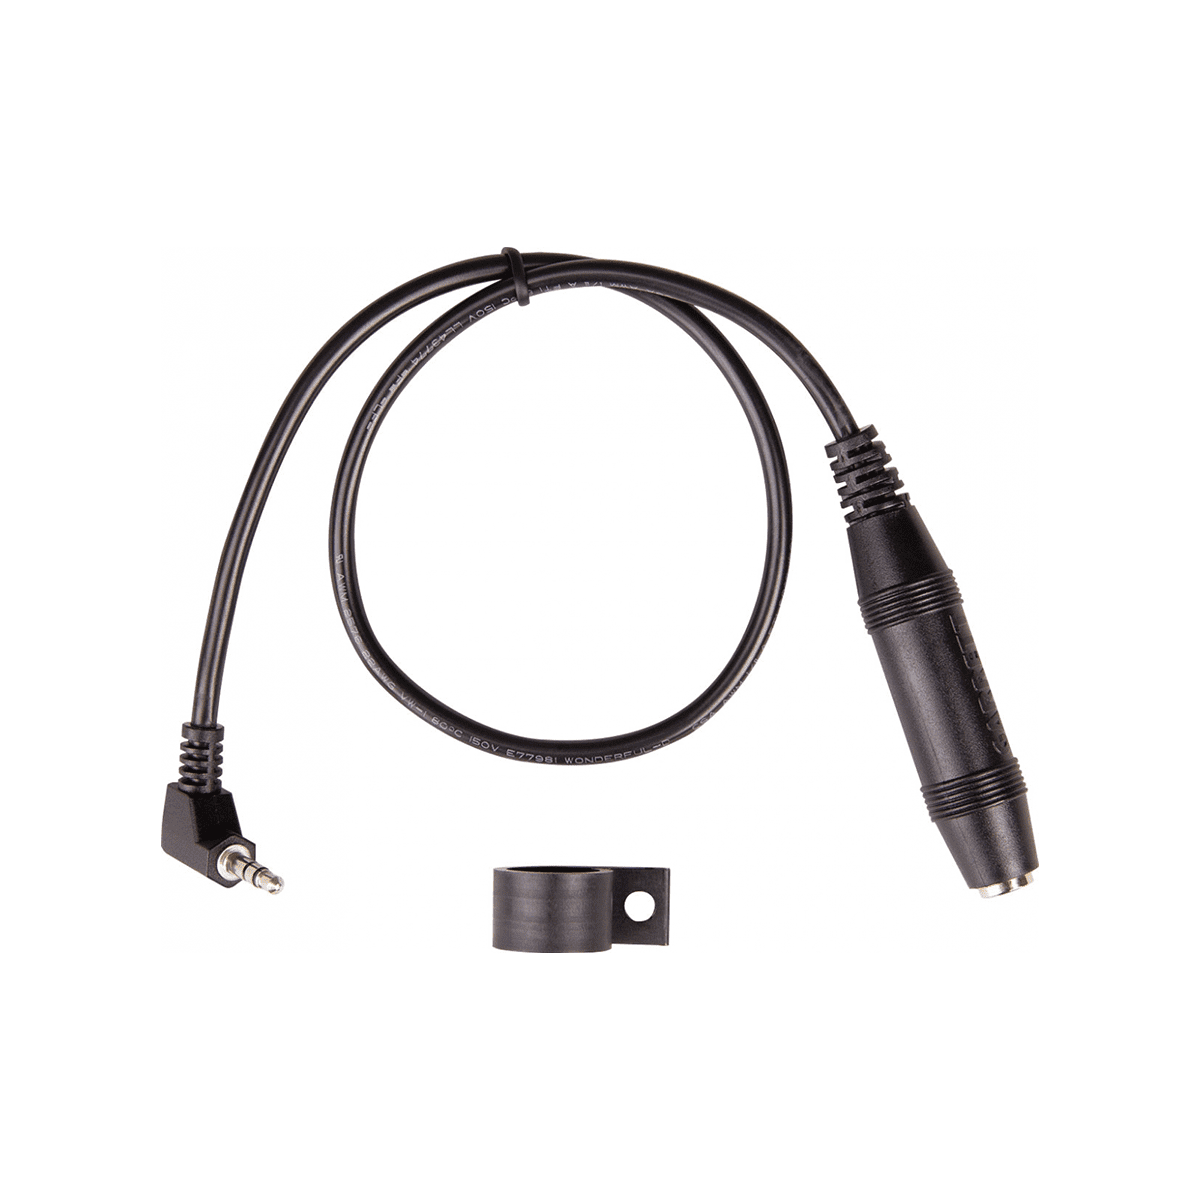 1/8" to 1/4" Headphone connection adapter